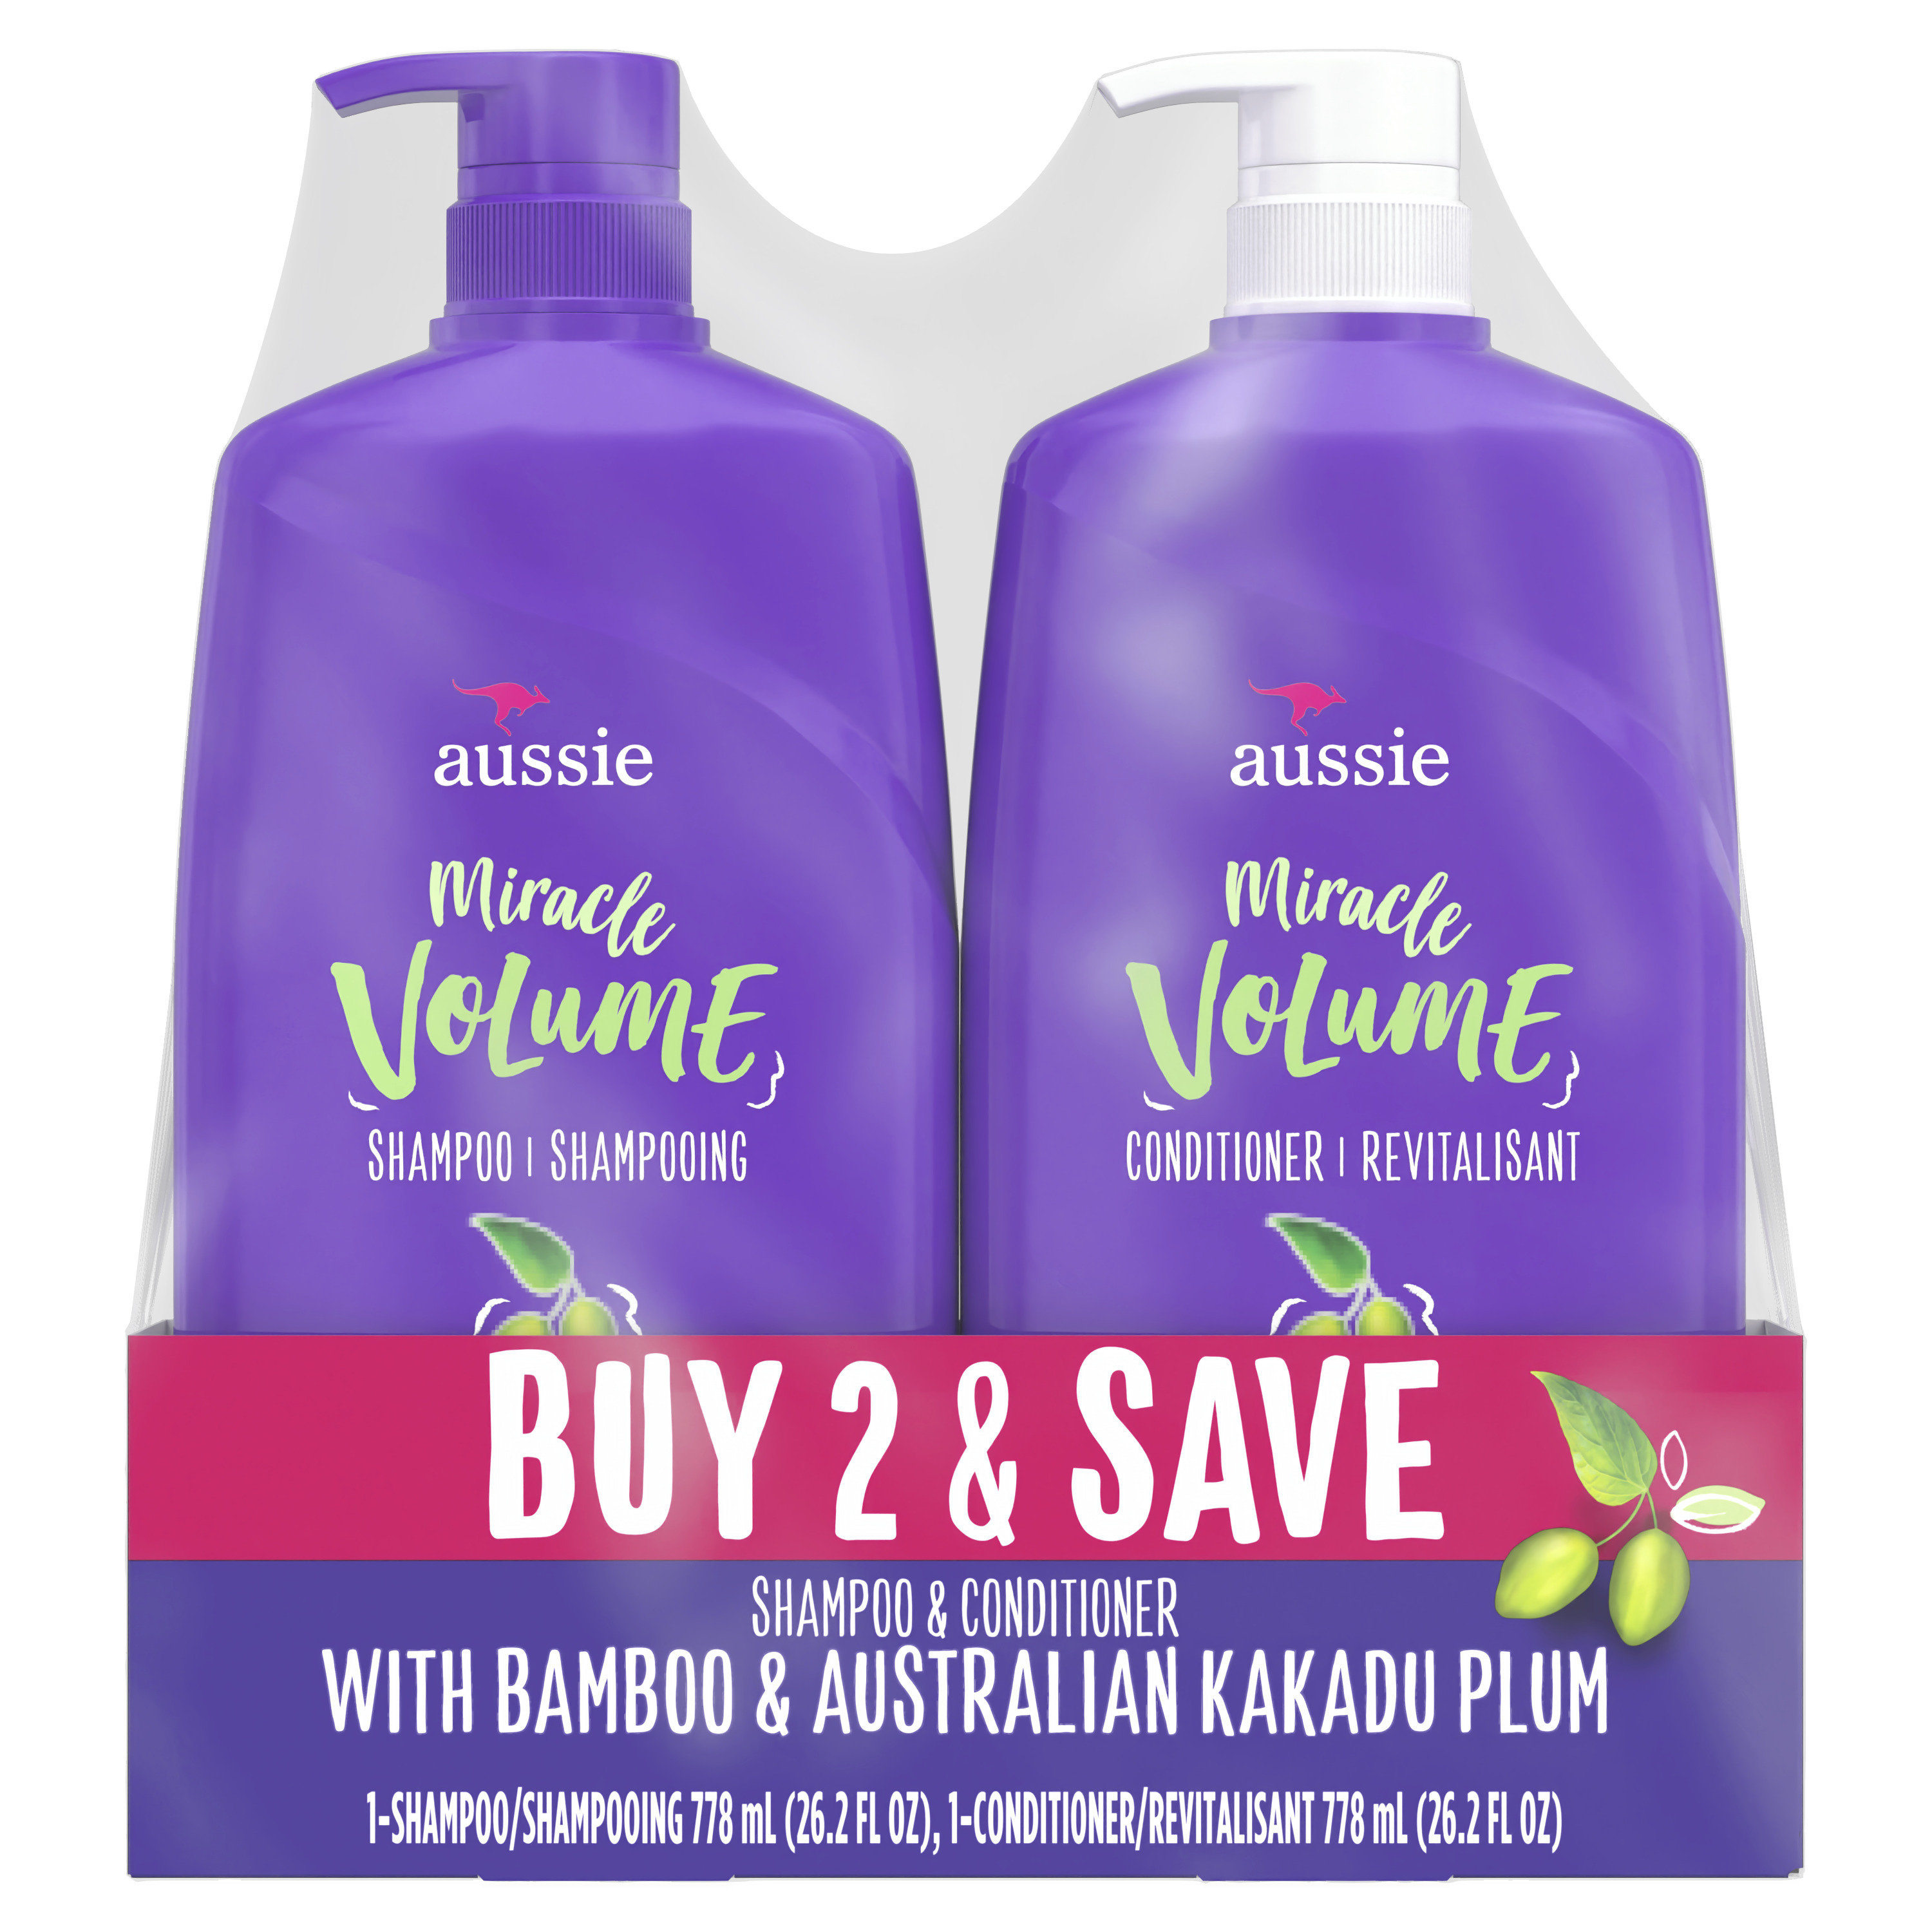 Aussie Miracle Volume Shampoo and Conditioner Hair Set, All Hair Types, 26.2 fl oz - image 1 of 10